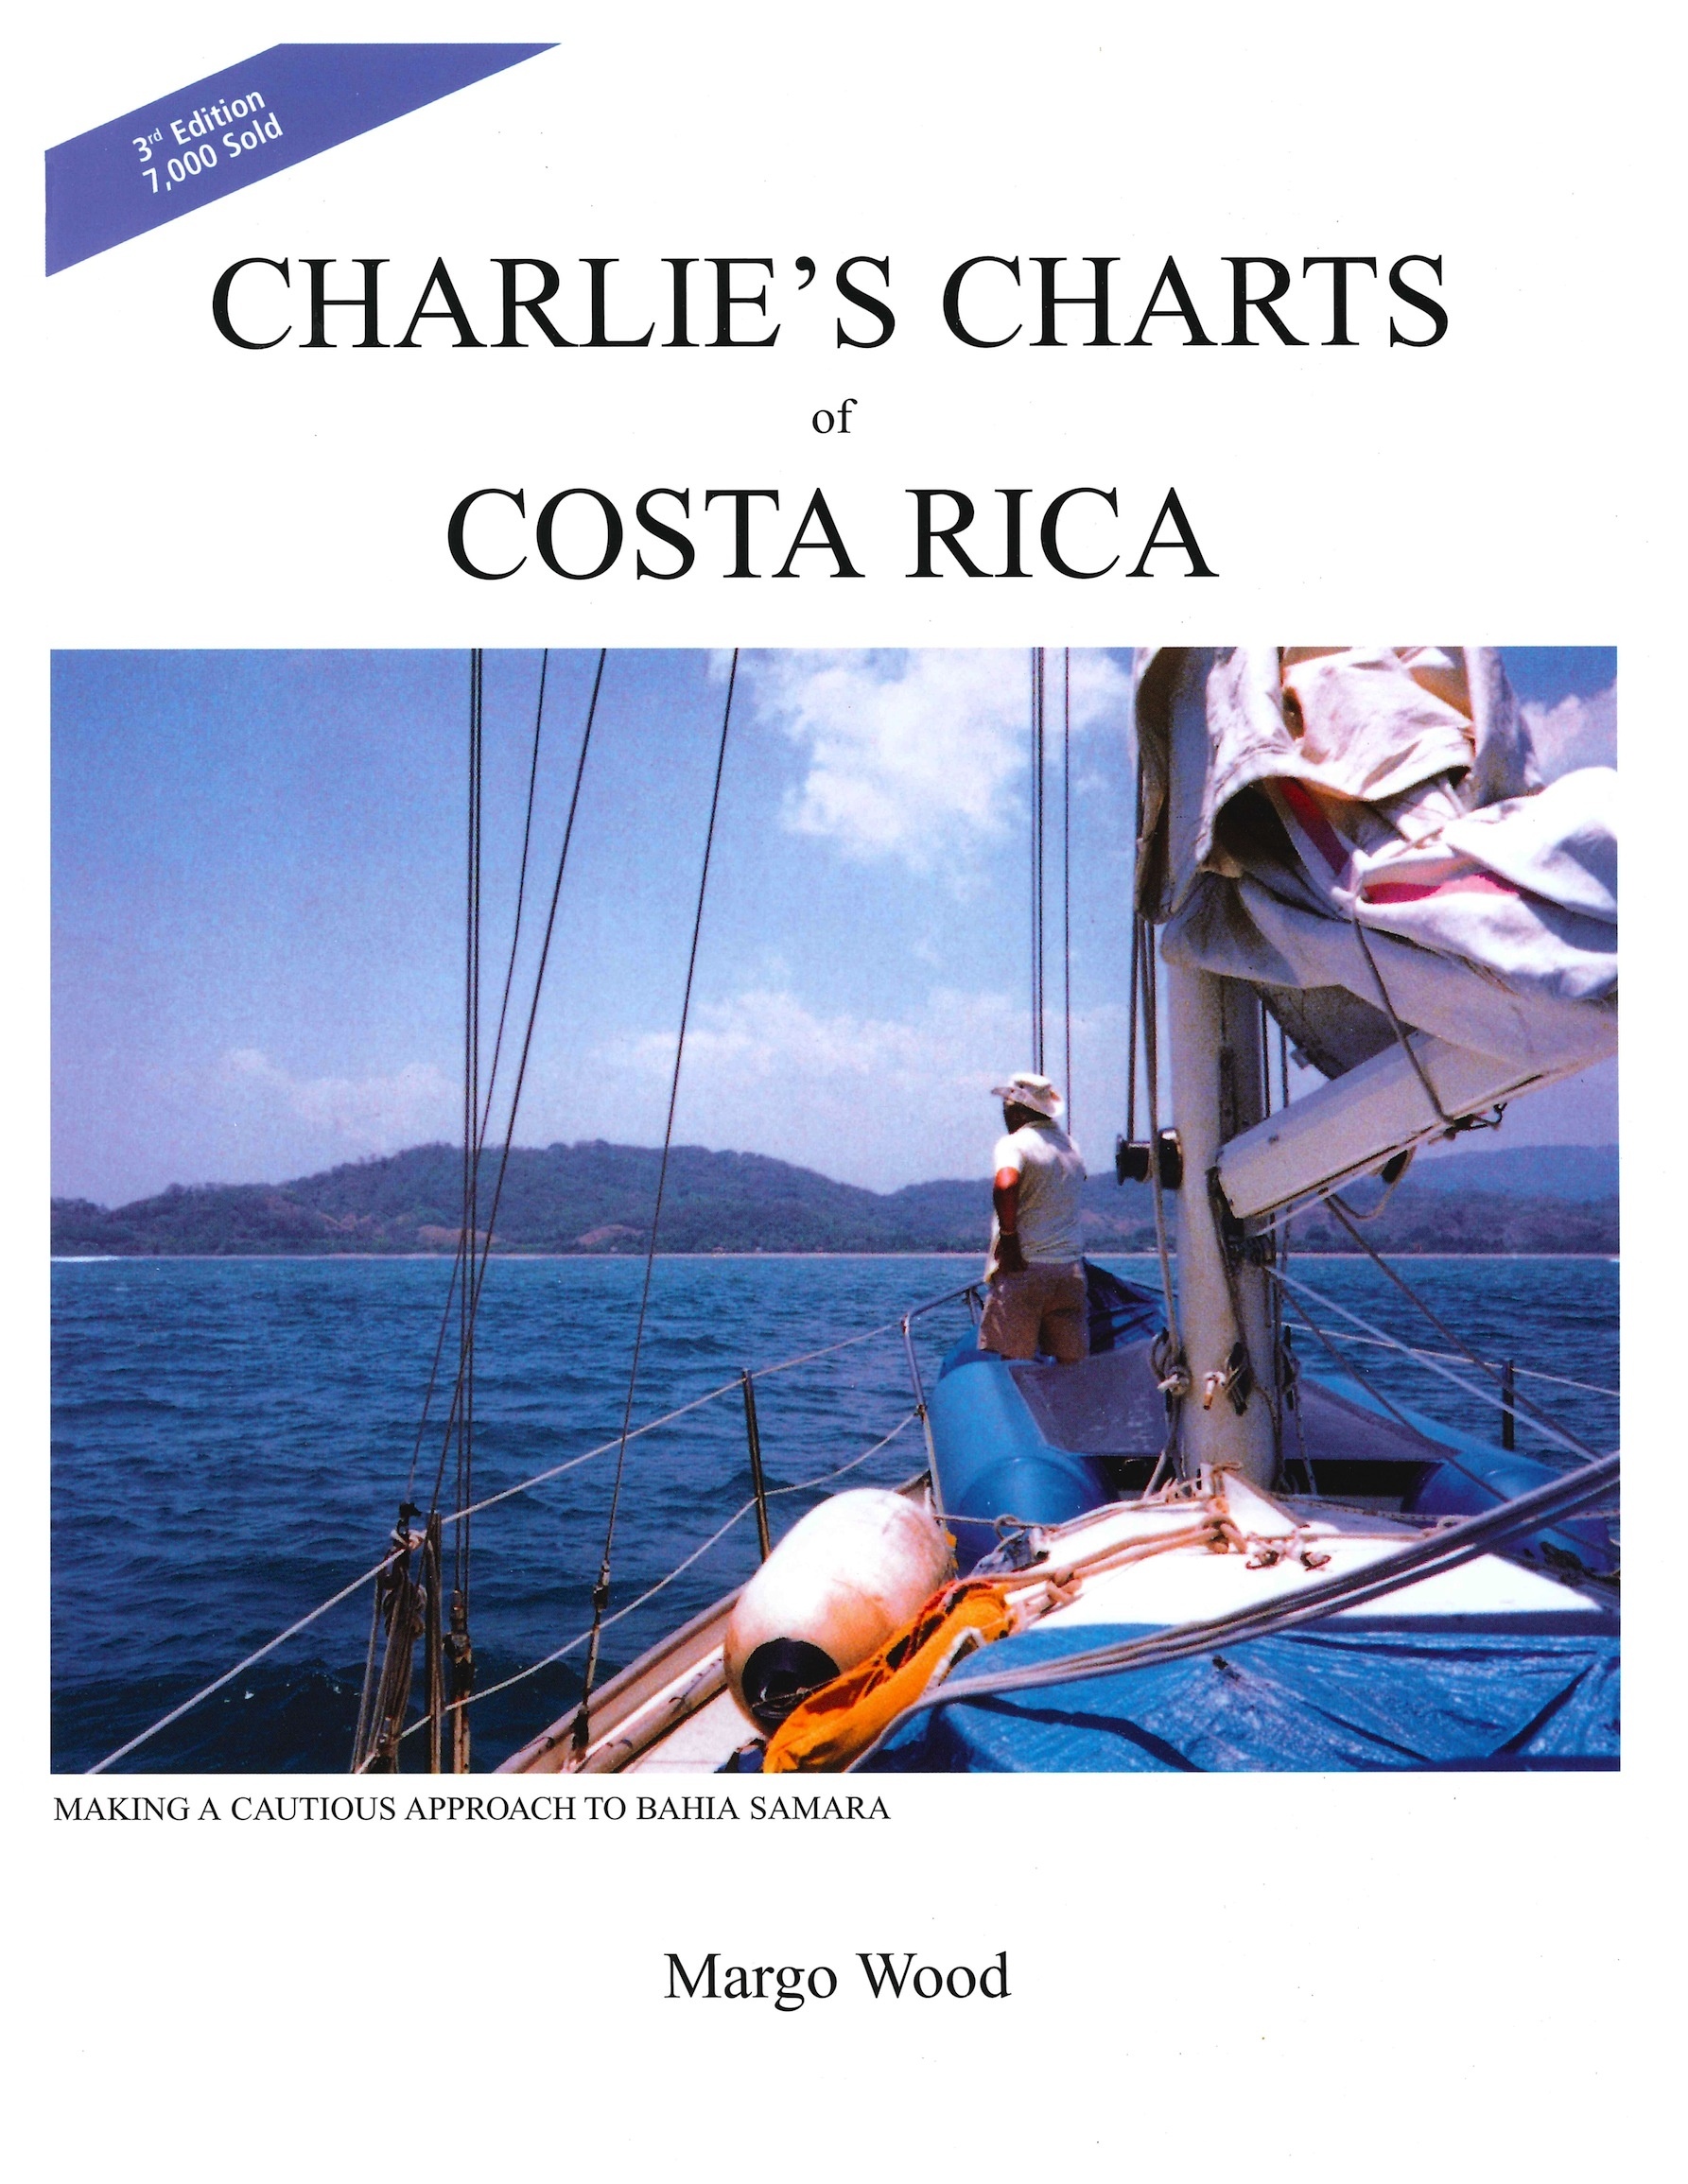 Charlie's charts of Costa Rica